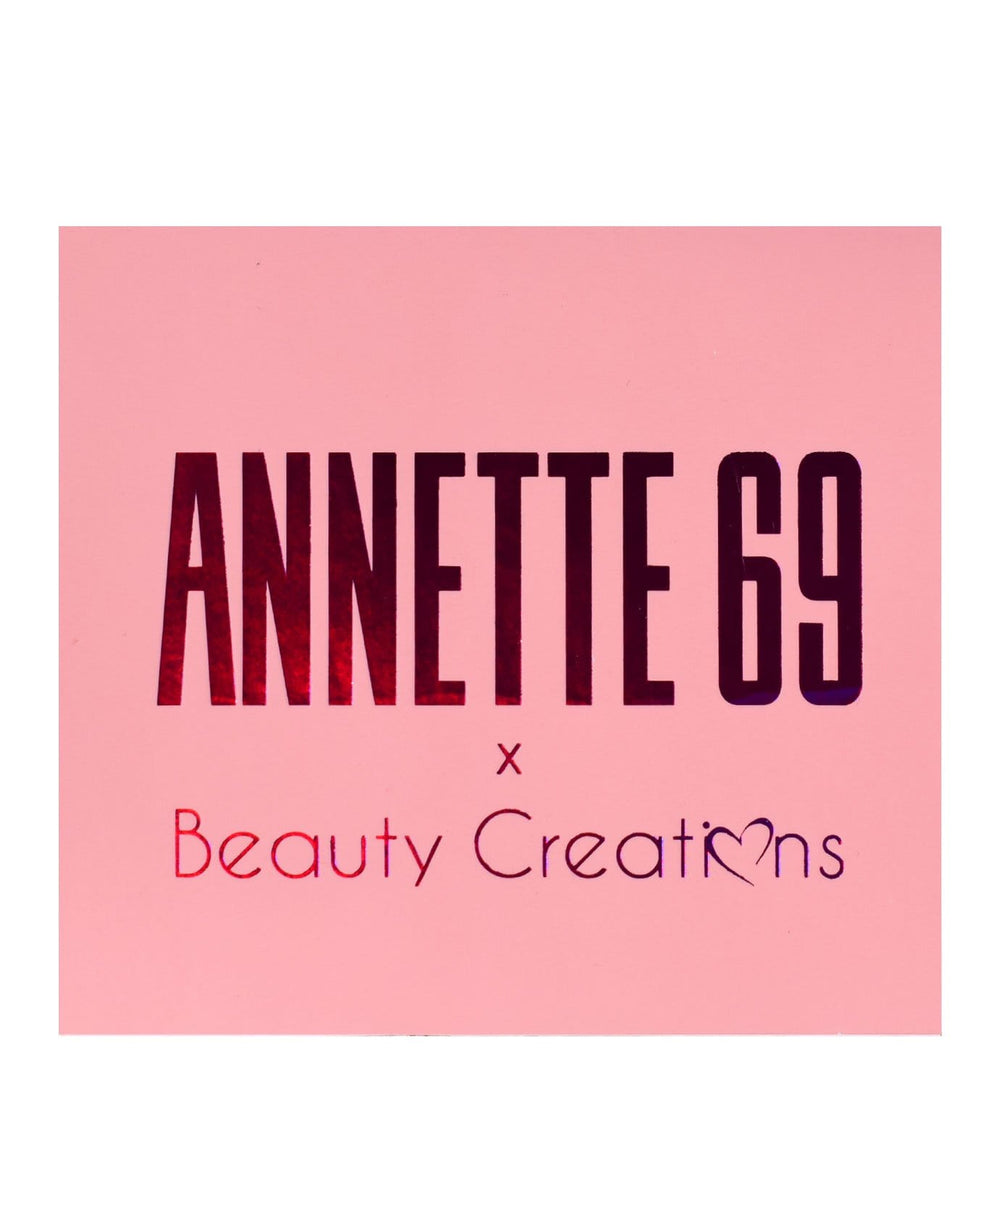 Beauty Creations Annette 69